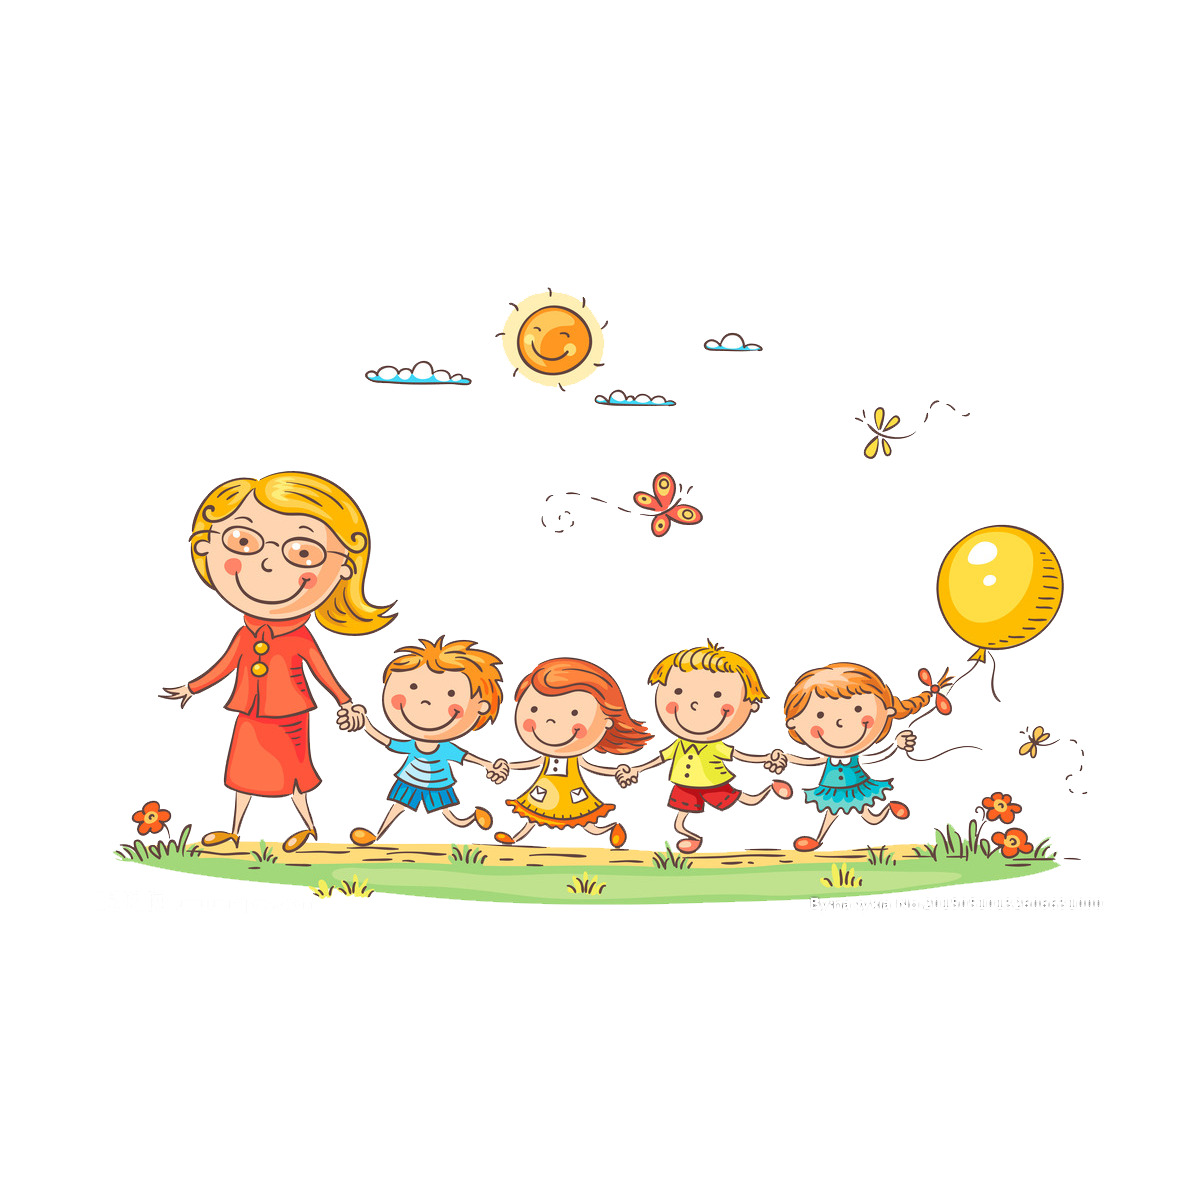 Preschool teacher clipart clipart images gallery for free